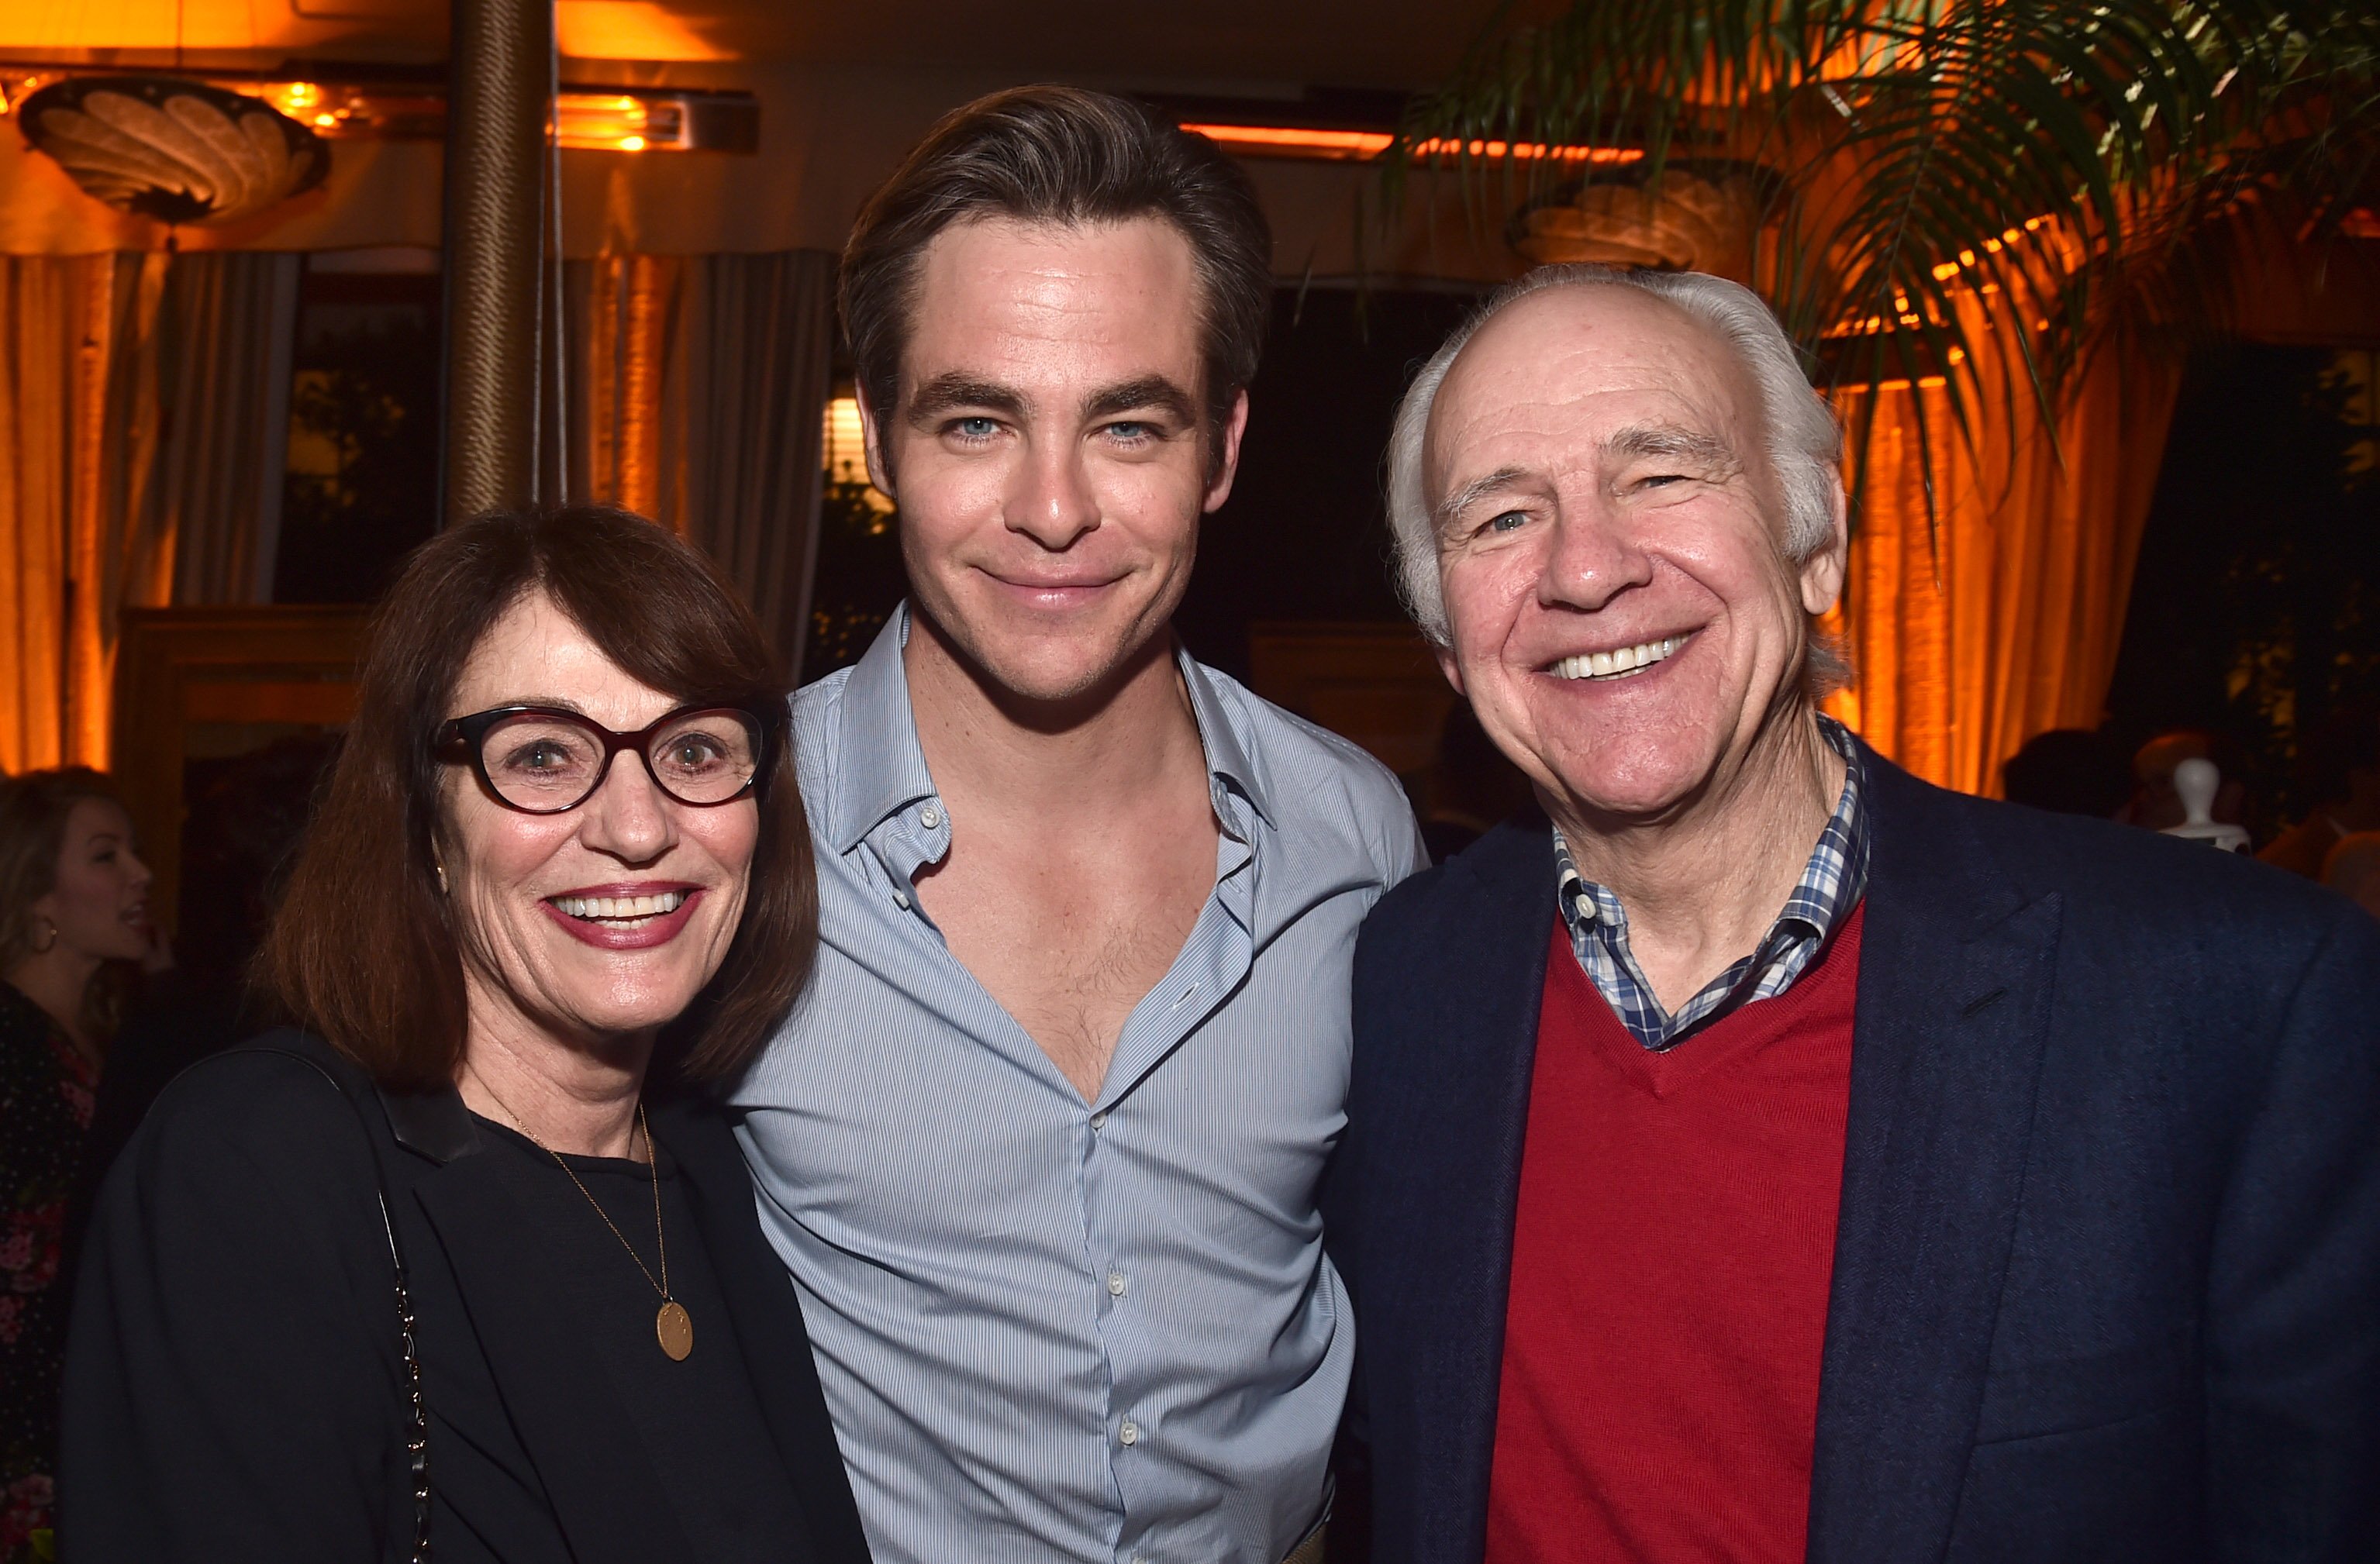 Gwynne Gilford, Chris Pine and Robert Pine attend the after party for the premiere of TNT's "I Am The Night" on January 24, 2019 in Los Angeles, California | Source: Getty Images